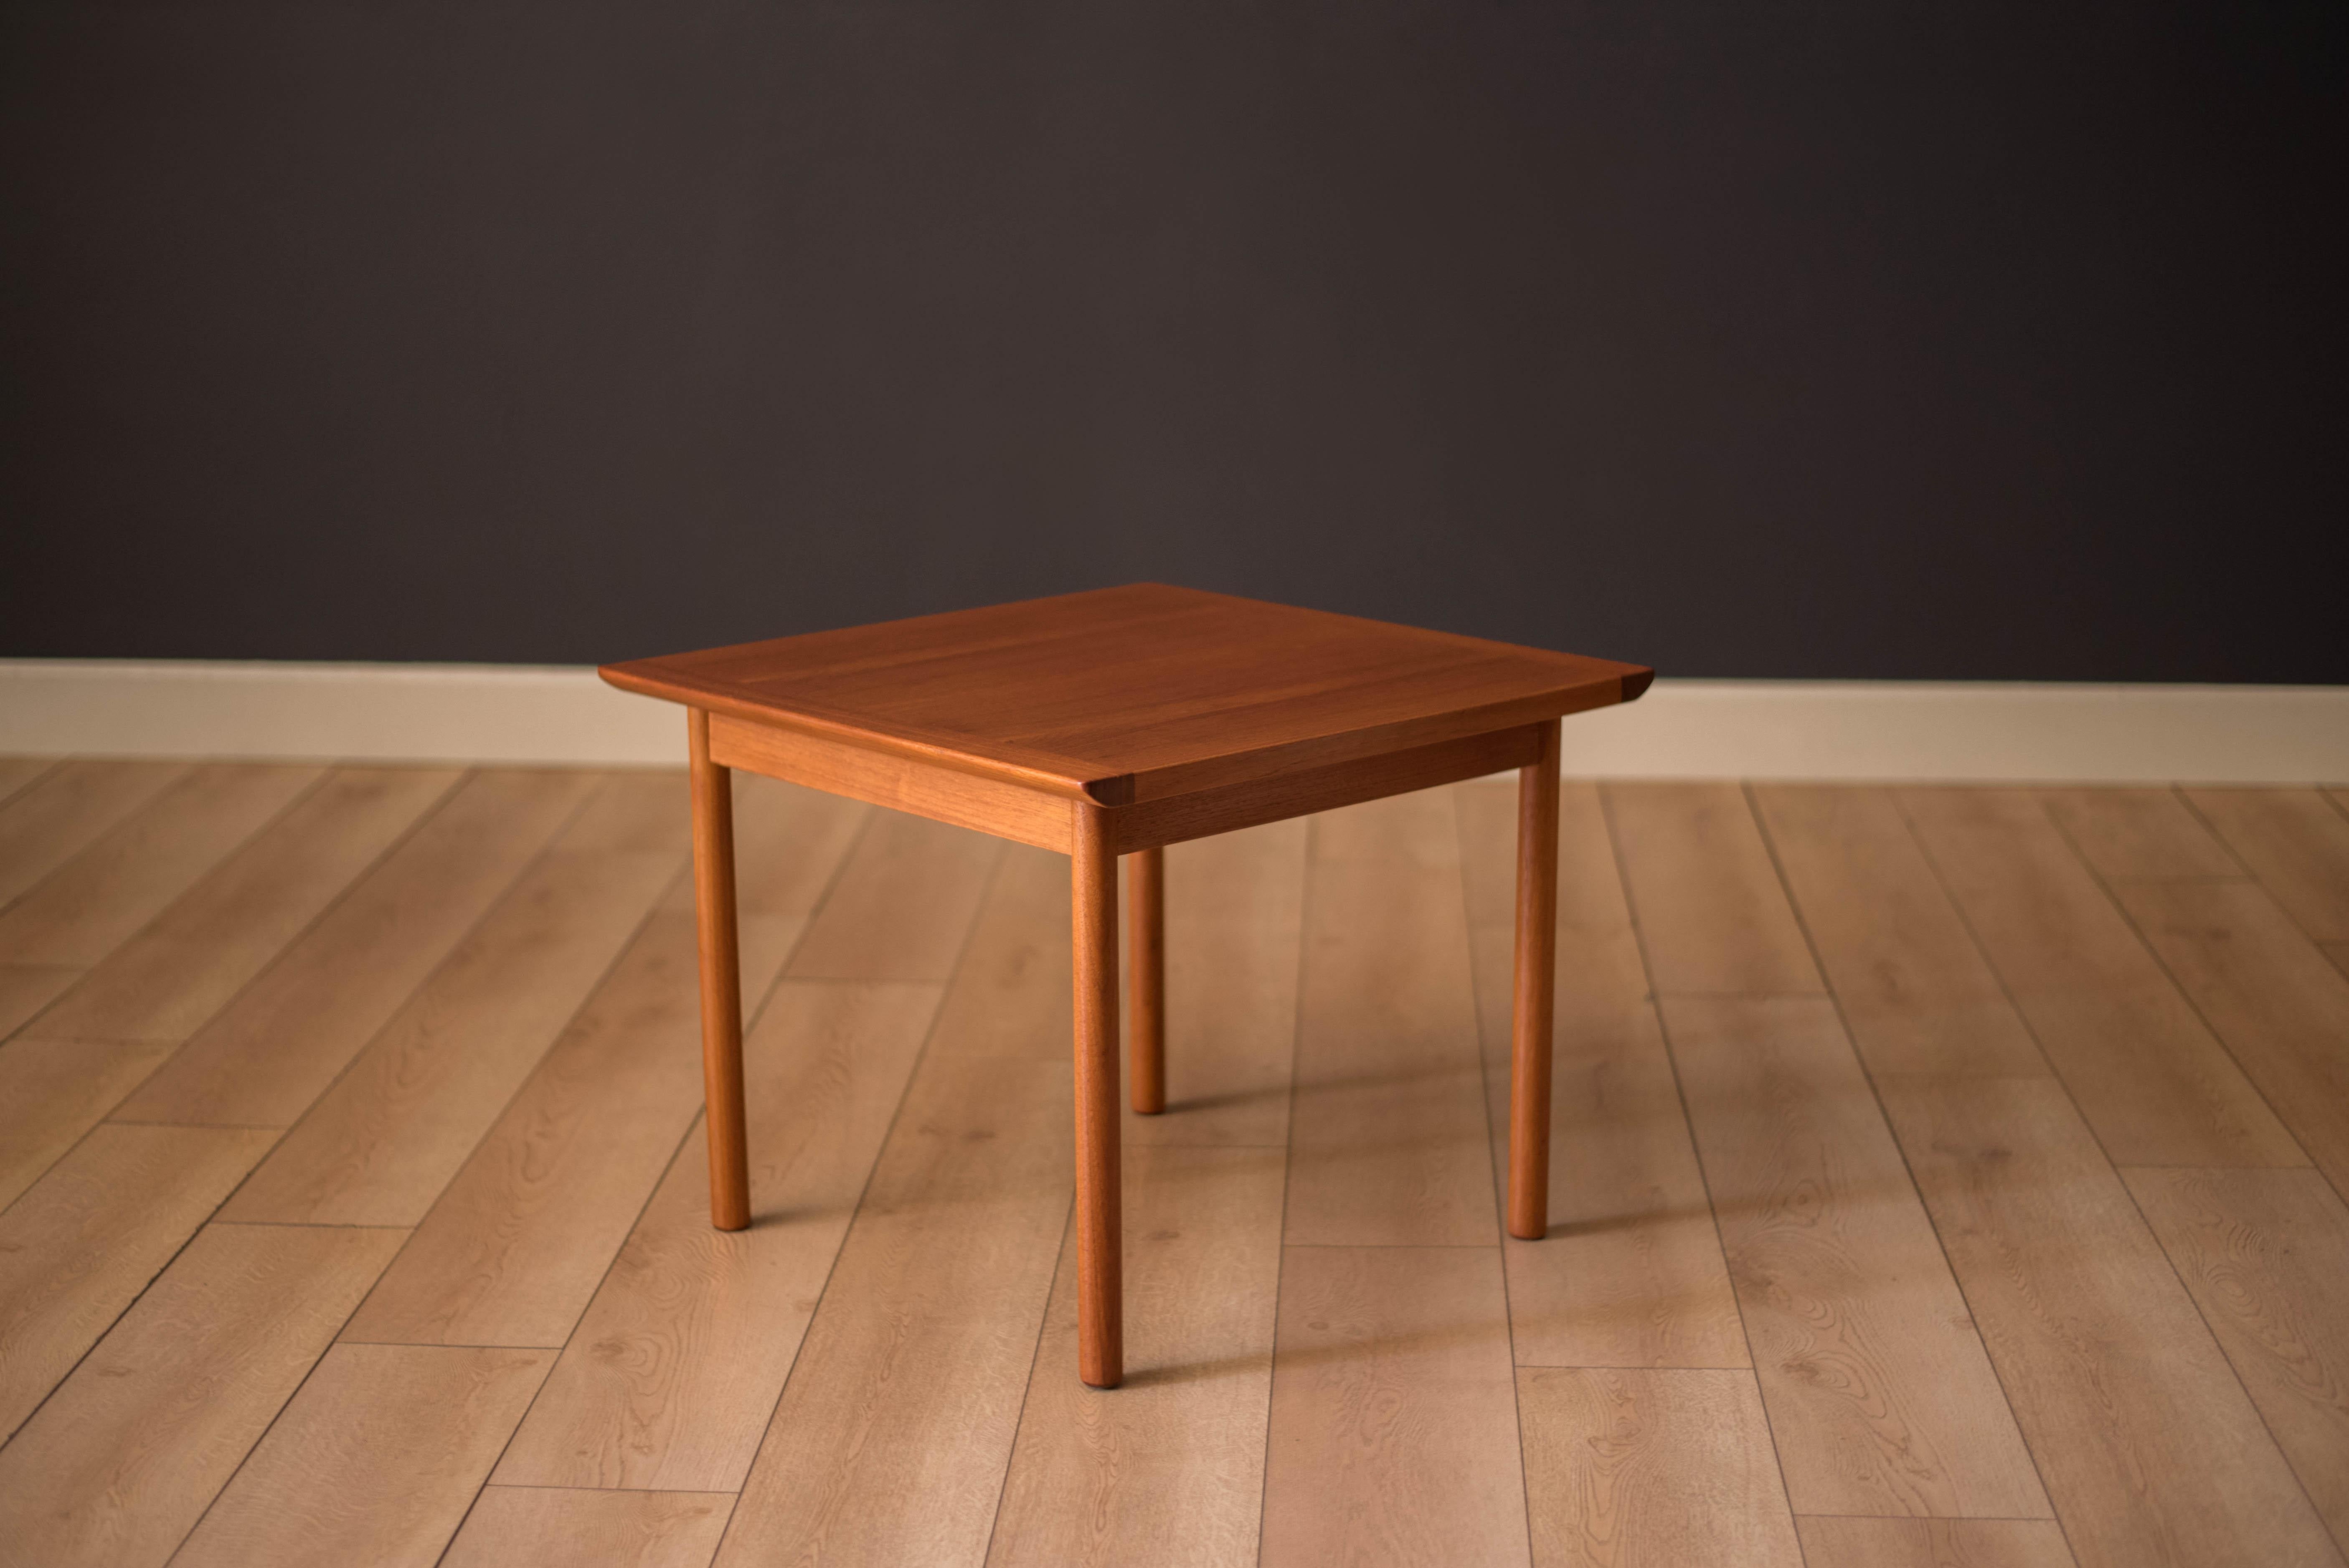 Mid-Century Modern square end table by Westnofa of Norway in teak. Features solid teak curved edges and linear dowel legs. This piece fits perfectly as a side or occasional table.




Offered by Mid Century Maddist